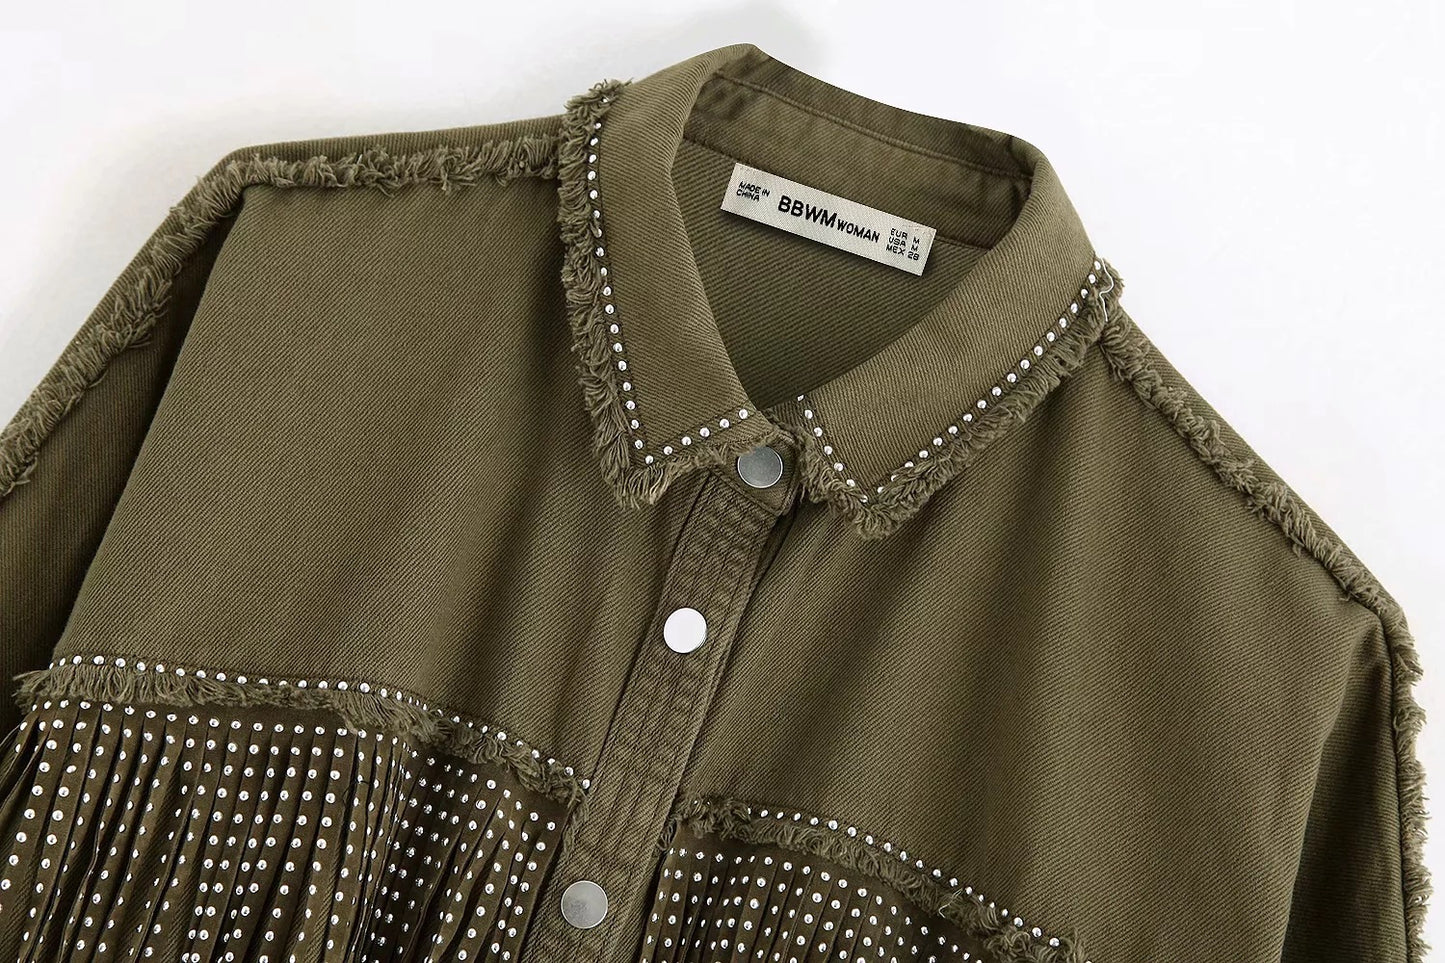 Jacket with fringed rivets